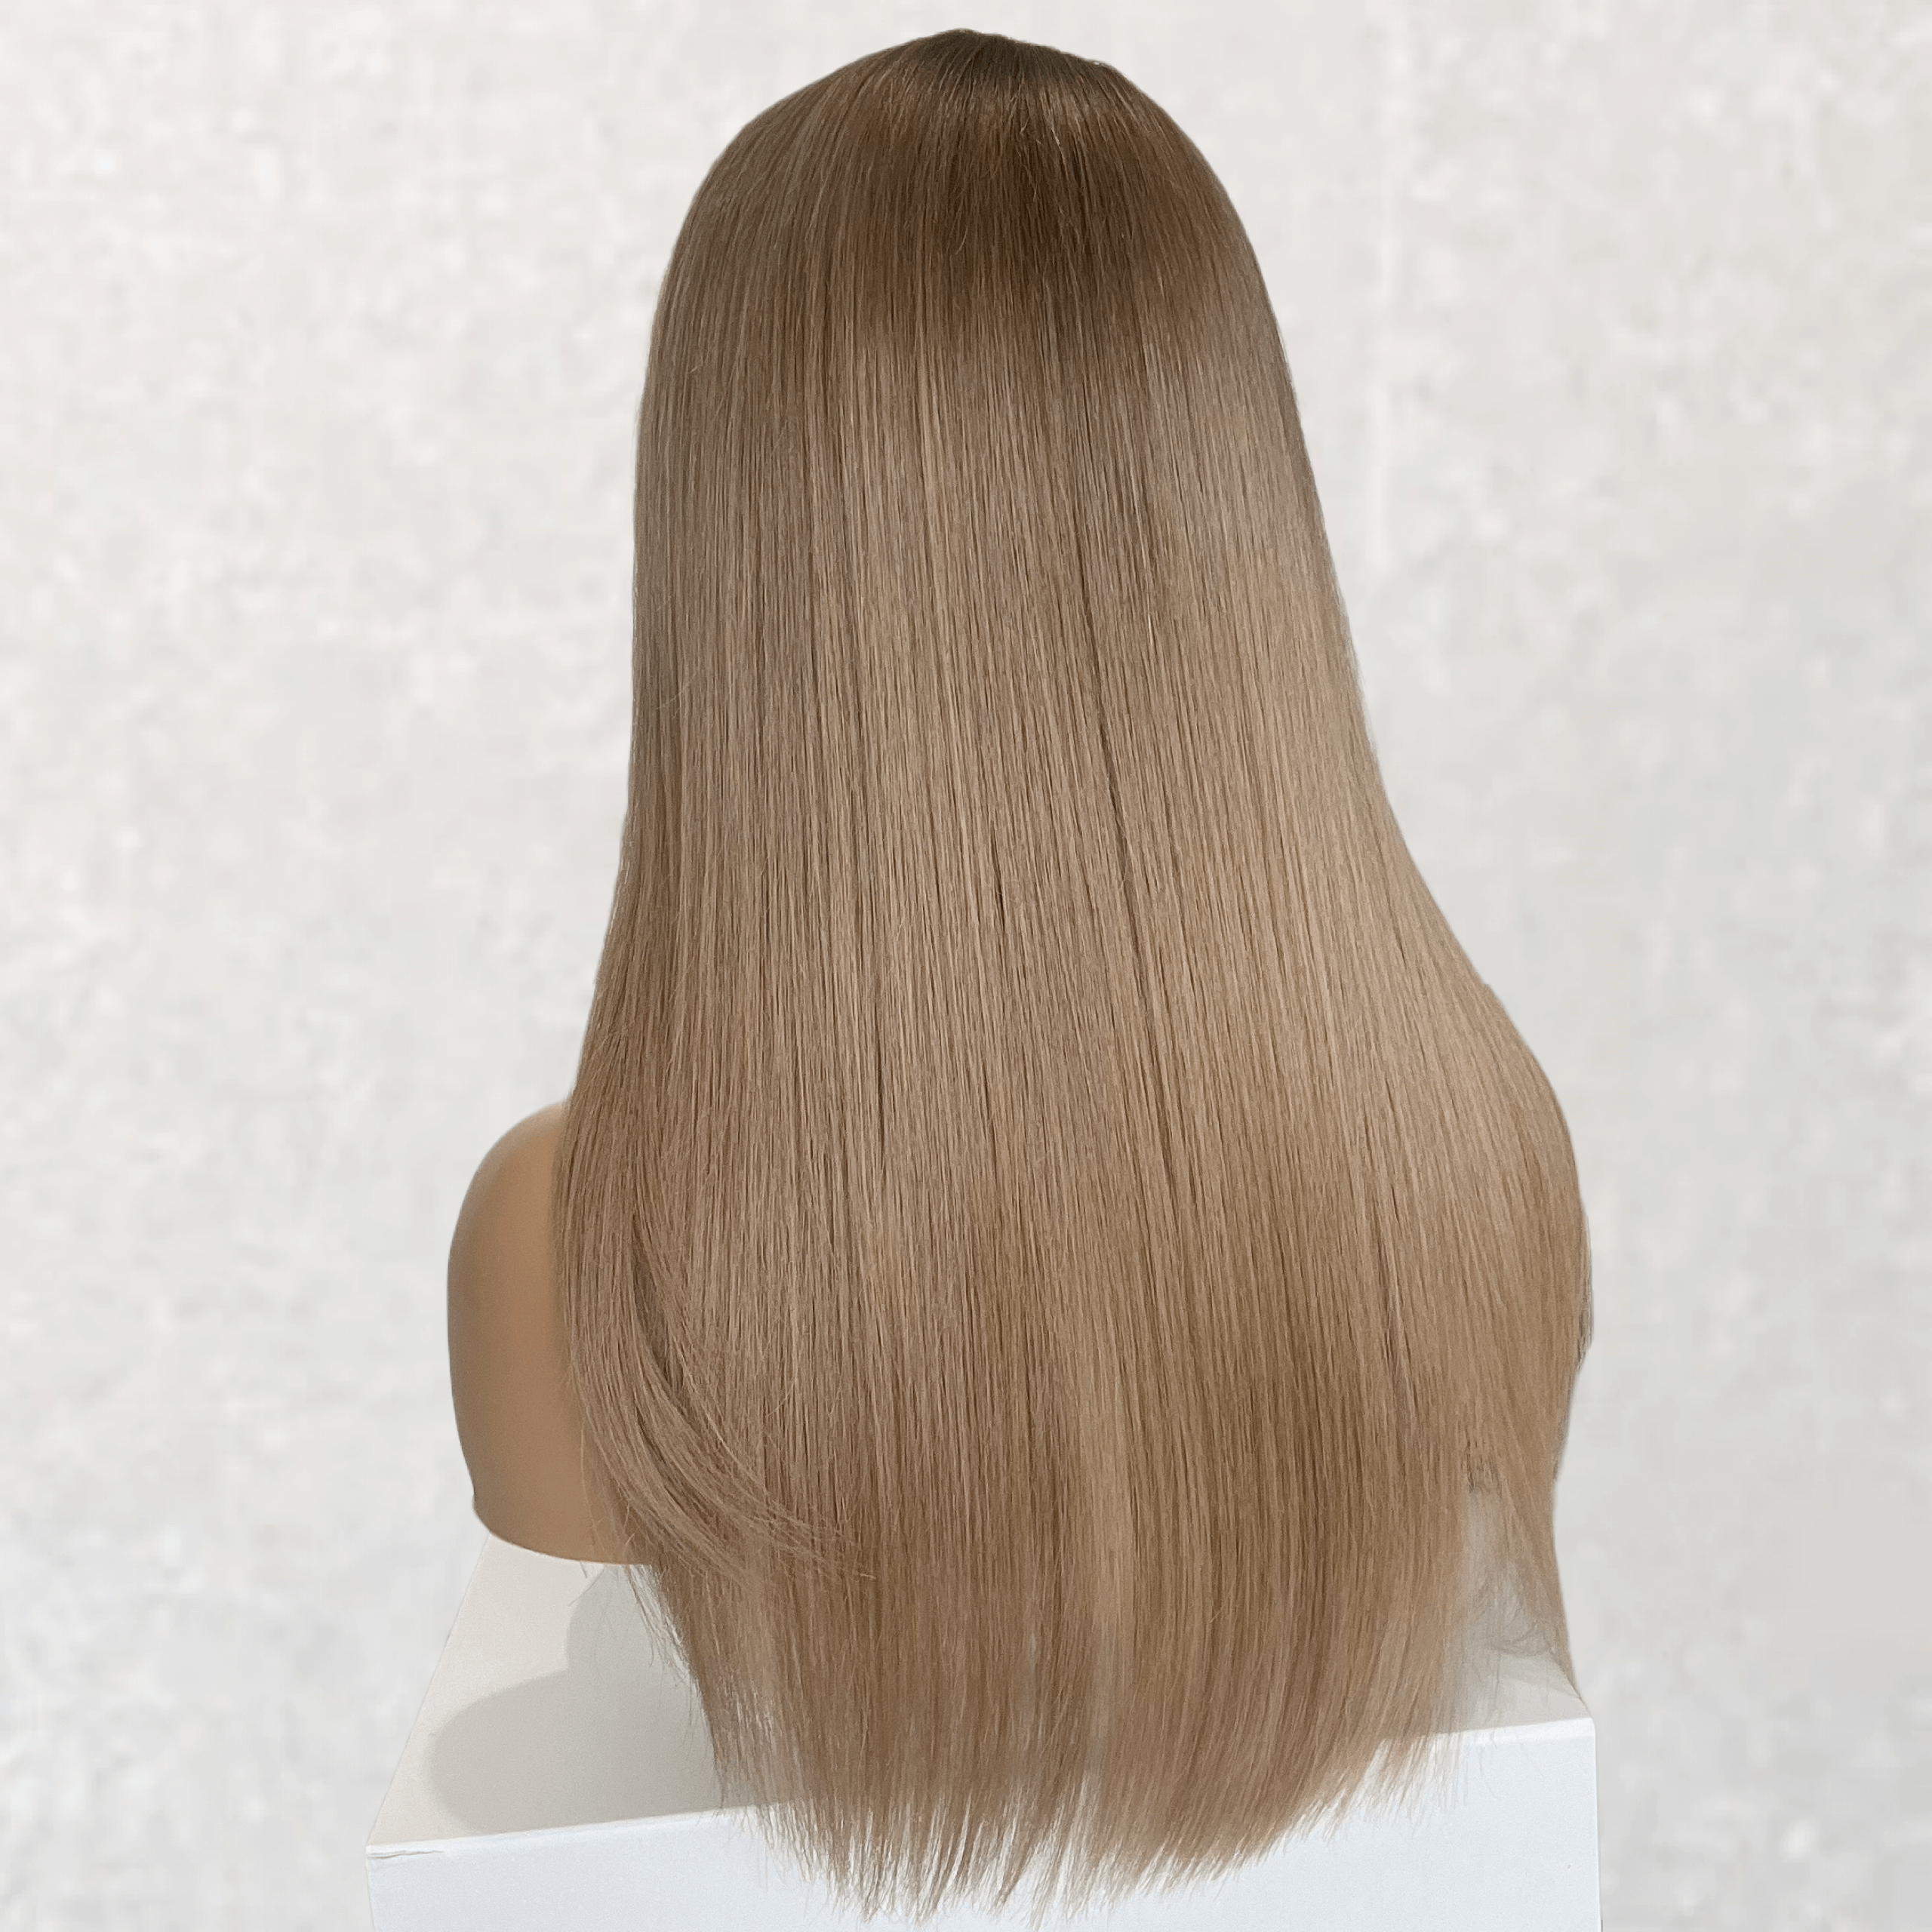 Glueless Lace Front Human Hair Wig Blonde Balayage Wig 20 Inch - Summer